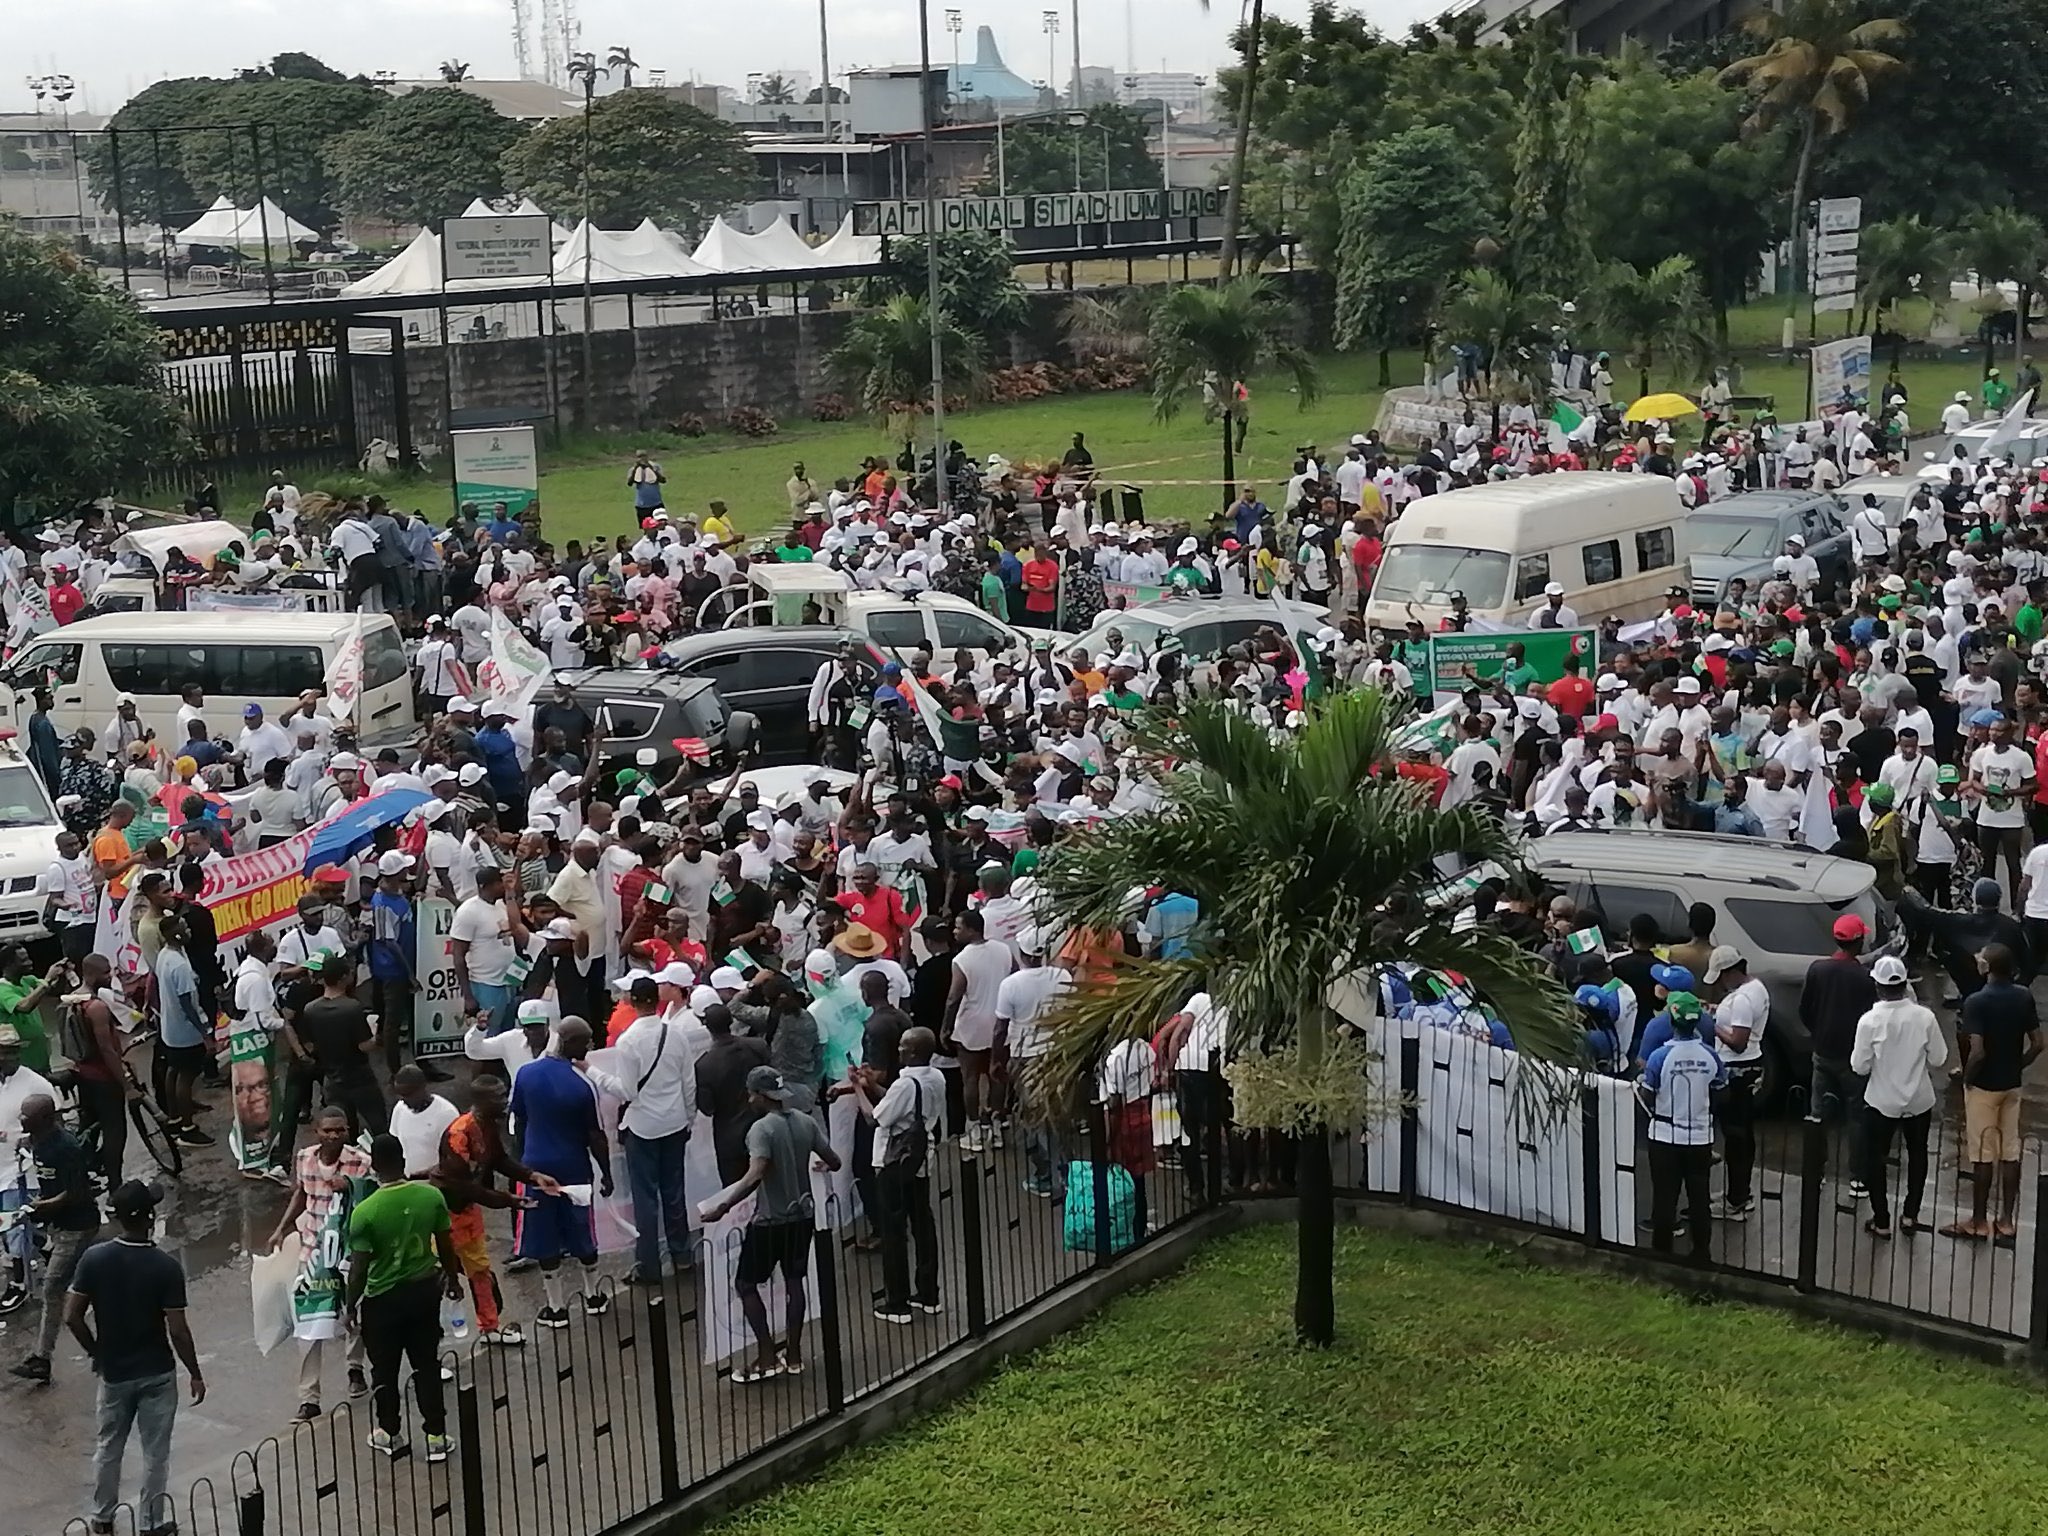 Highlights Of Lagos Rally for Peter Obi, Datti